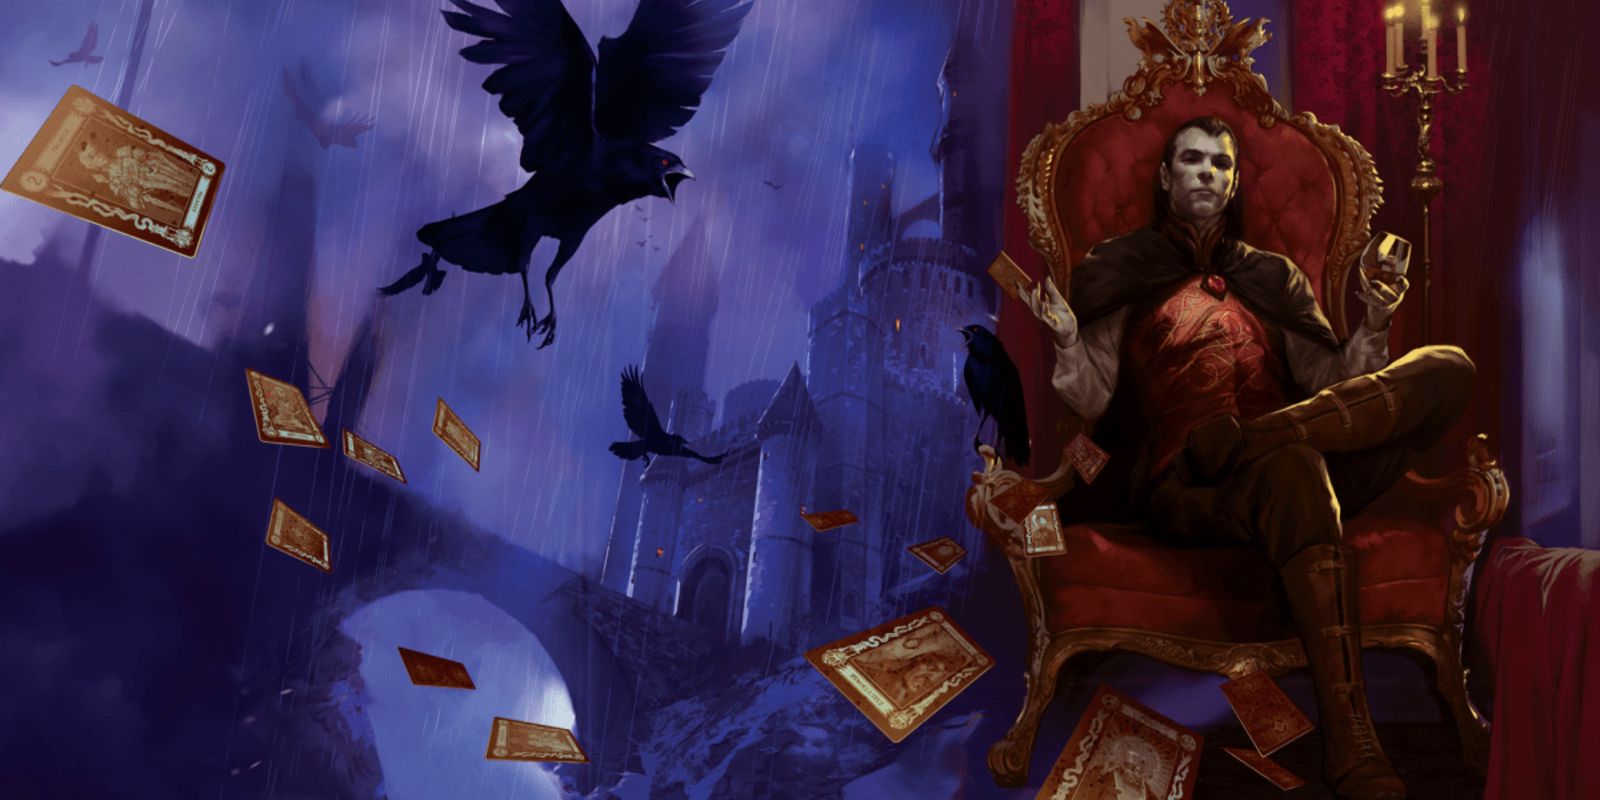 Curse of Strahd artwork shows a man sitting on a red throne alongside a raven